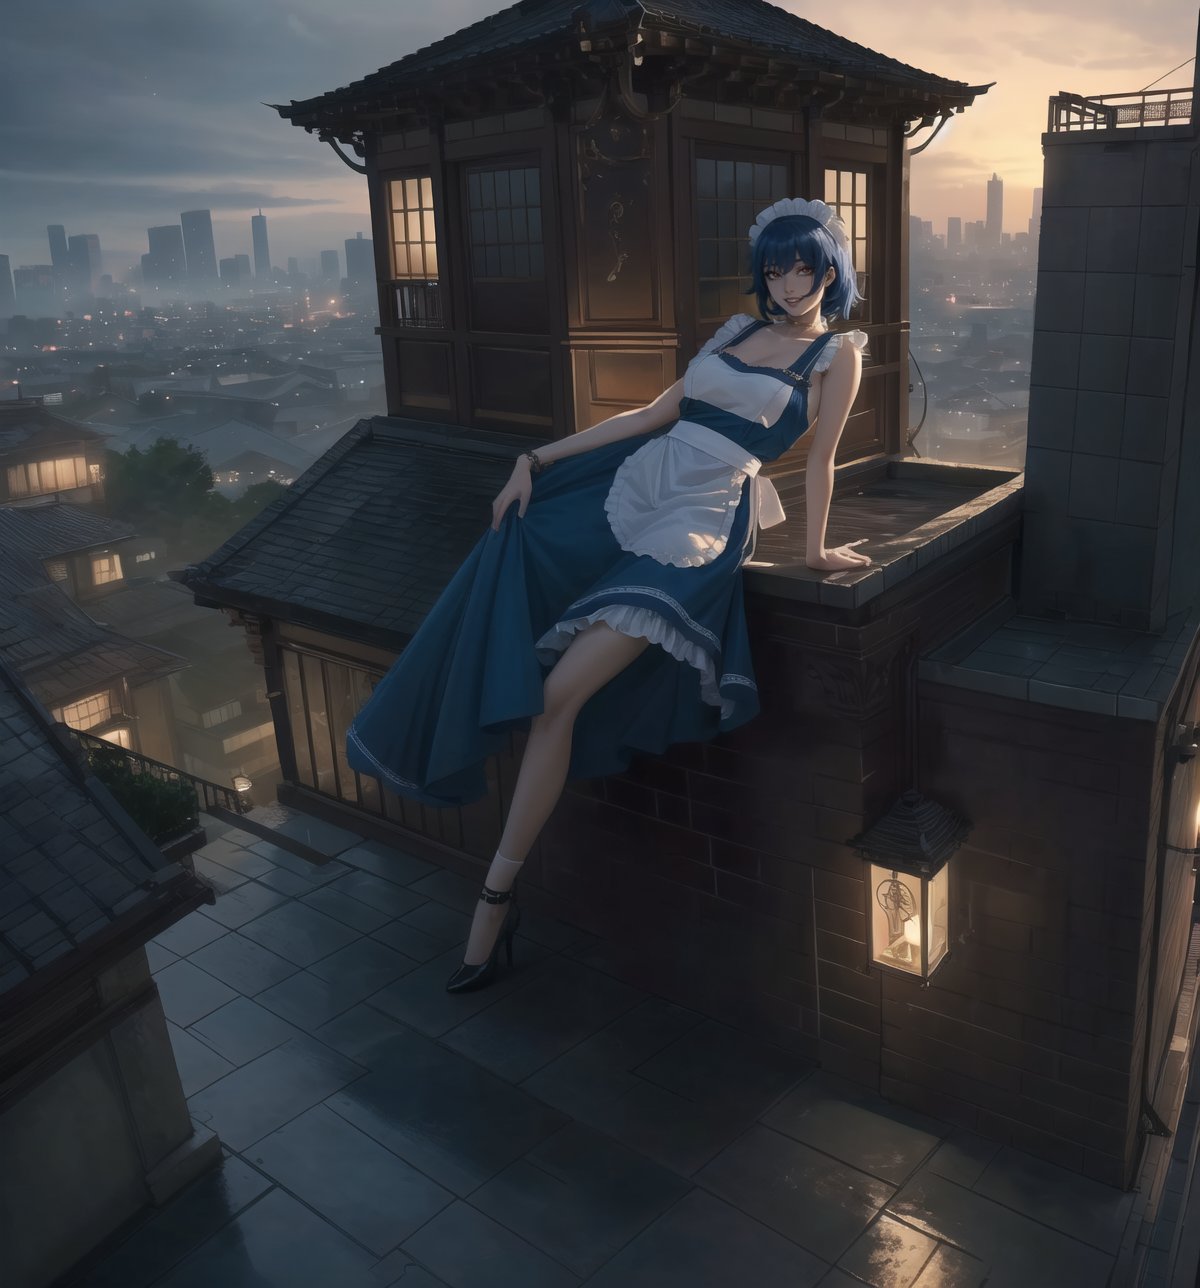 A masterpiece of urban art with a realistic style and graphic details. | Miyuki, a 23-year-old woman, is dressed in a maid's outfit, consisting of a blue dress with a white apron, white stockings, and black low-heeled shoes. She also wears a white headscarf, which gives her an air of innocence and purity. Her blue hair is long and straight, with a modern and stylish cut. Her red eyes are looking at the viewer, smiling and showing her white teeth. She is on a building balcony, overlooking the bustling city below. | The image highlights Miyuki's imposing figure and the architectural elements of the balcony and the building. The concrete and glass structures, along with Miyuki, create an urban and seductive atmosphere. The artificial lighting of the city illuminates the scene, creating dramatic shadows and emphasizing the details of the scene. | Soft and dark lighting effects create a relaxing and mysterious atmosphere, while rough and detailed textures on the structures and outfit add realism to the image. | A relaxing and attractive scene of a beautiful woman on a building balcony, combining elements of urban art and modern architecture. | (((((The image reveals a full-body shot as she assumes a sensual pose, engagingly leaning against a structure within the scene in an exciting manner. She takes on a sensual pose as she interacts, boldly leaning on a structure, leaning back in an exciting way.))))). | ((full-body shot)), ((perfect pose)), ((perfect fingers, better hands, perfect hands)), ((perfect legs, perfect feet)), ((perfect design)), ((perfect composition)), ((very detailed scene, very detailed background, perfect layout, correct imperfections)), More Detail, Enhance, 